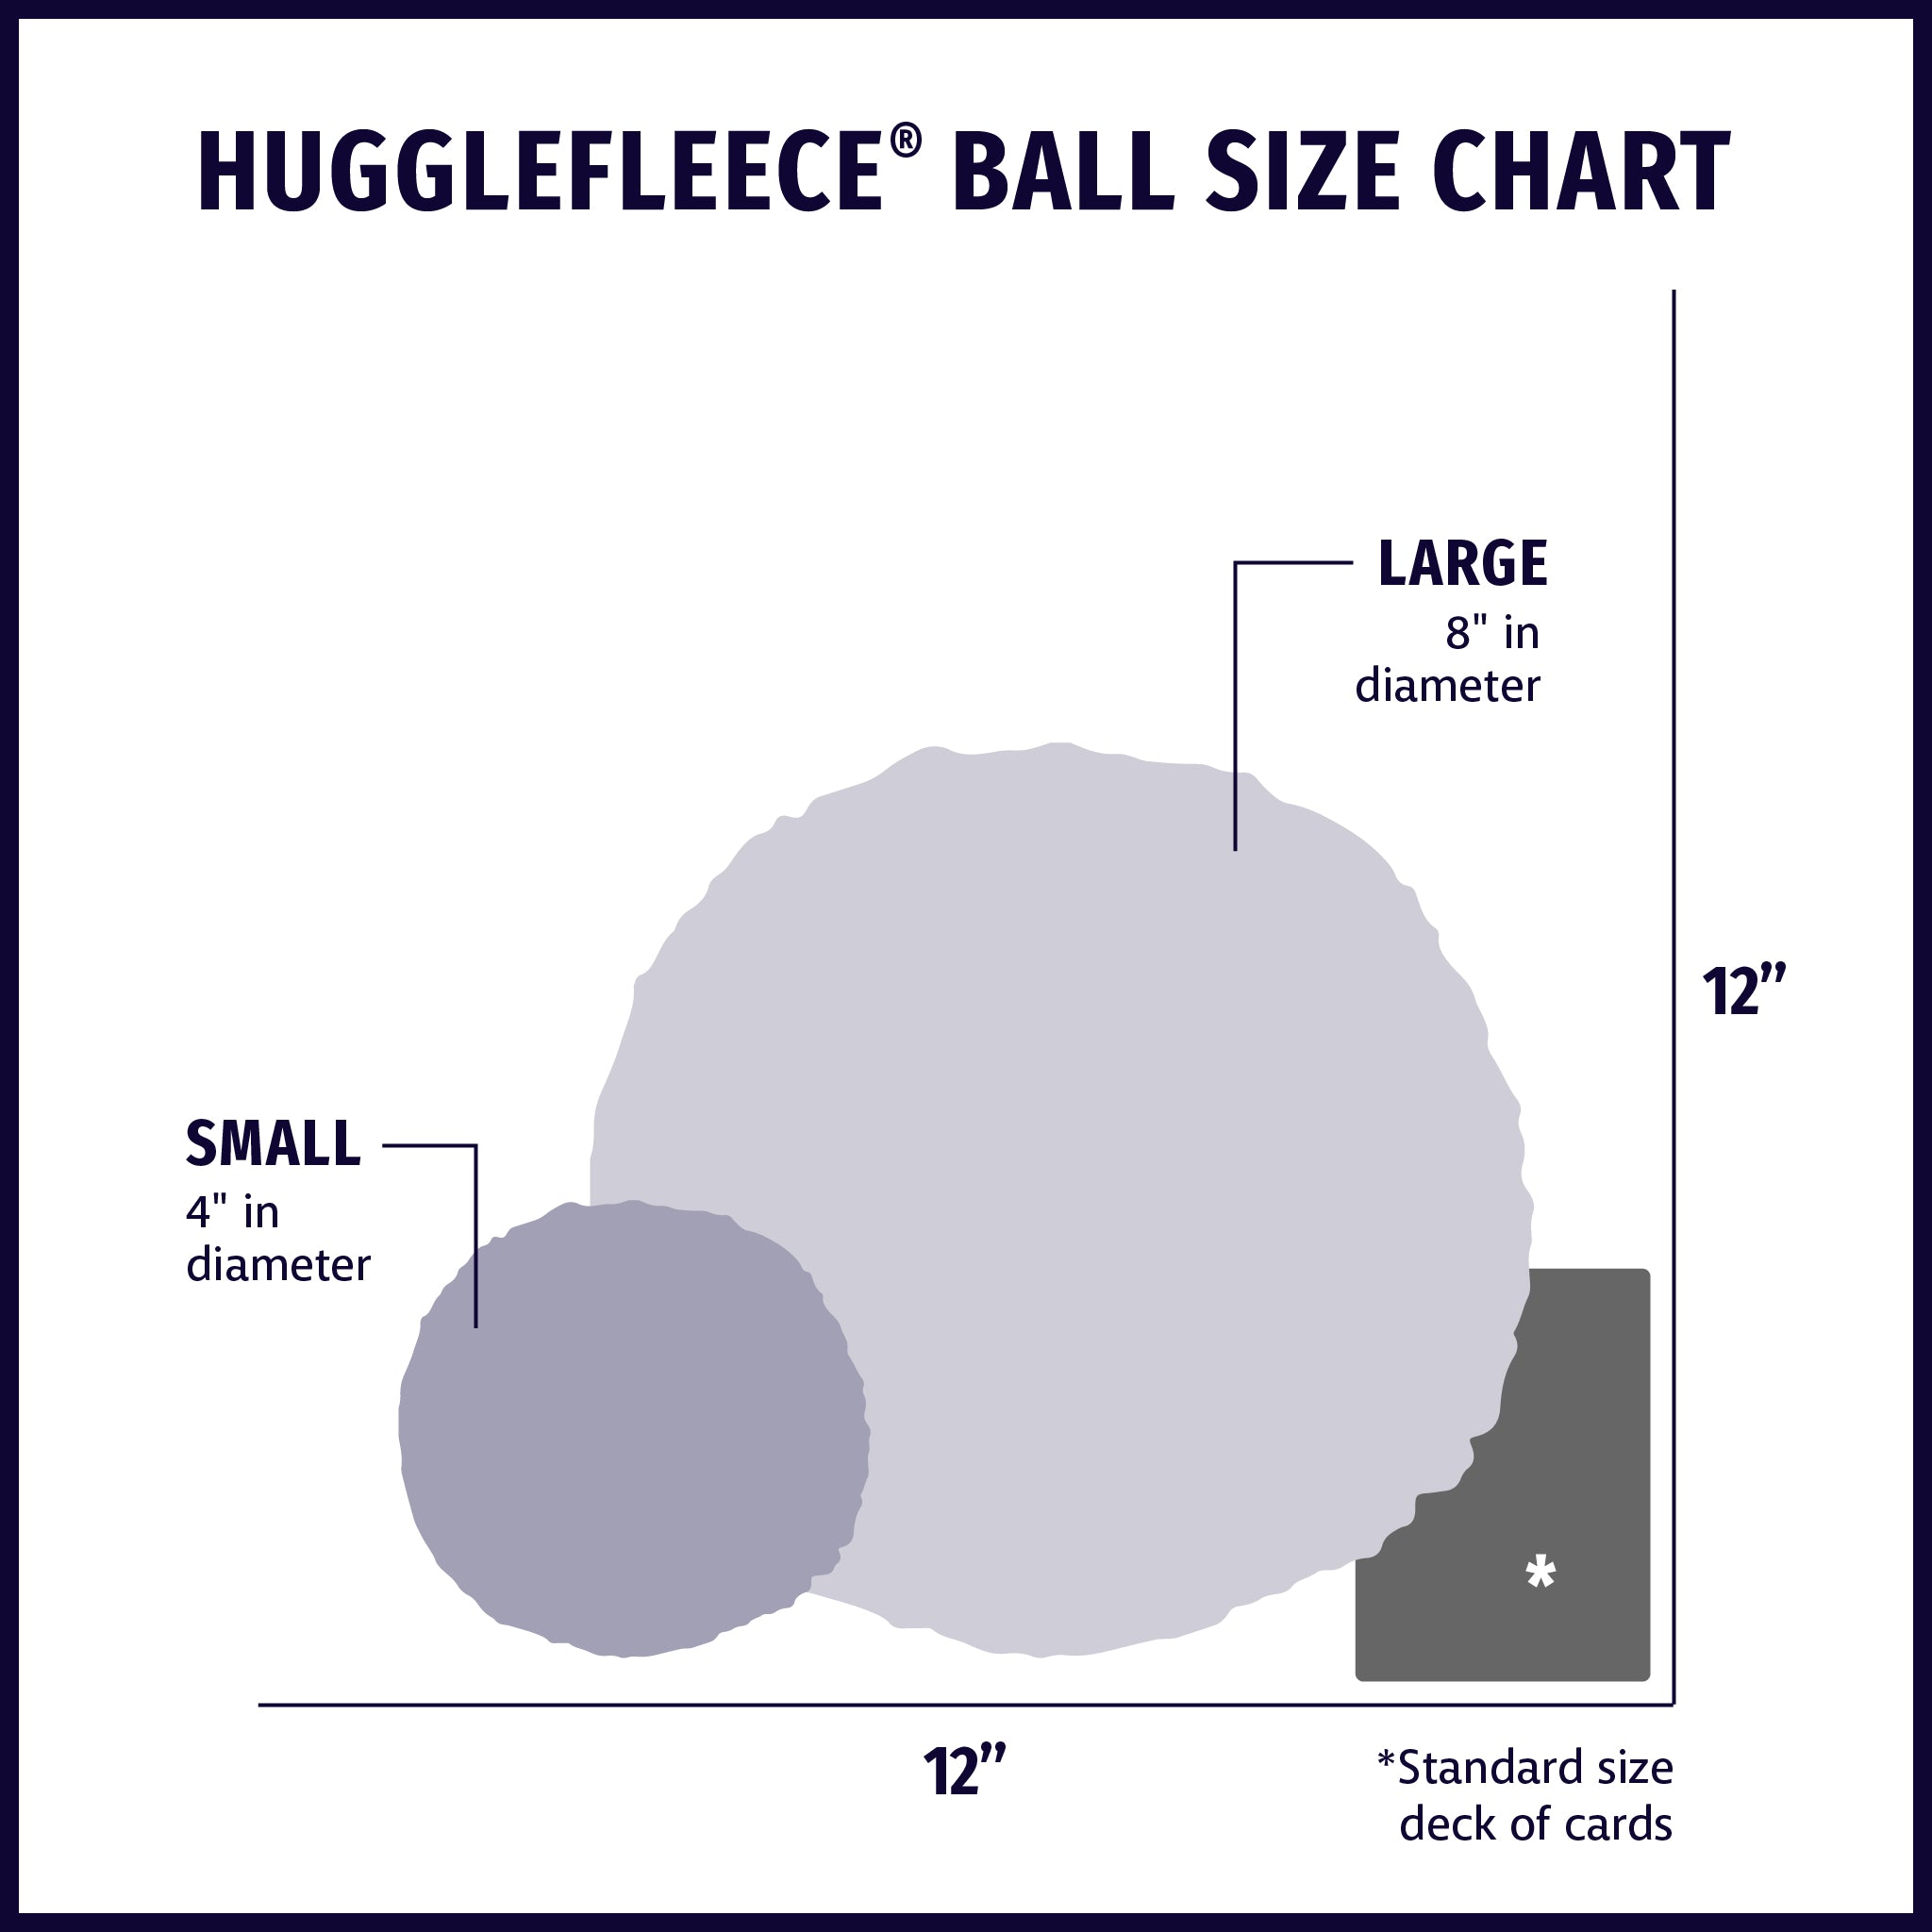 Size chart displaying HuggleFleece® plush ball dog toys silhouettes in small and large with approximate dimensions of each size compared to standard size deck of cards.